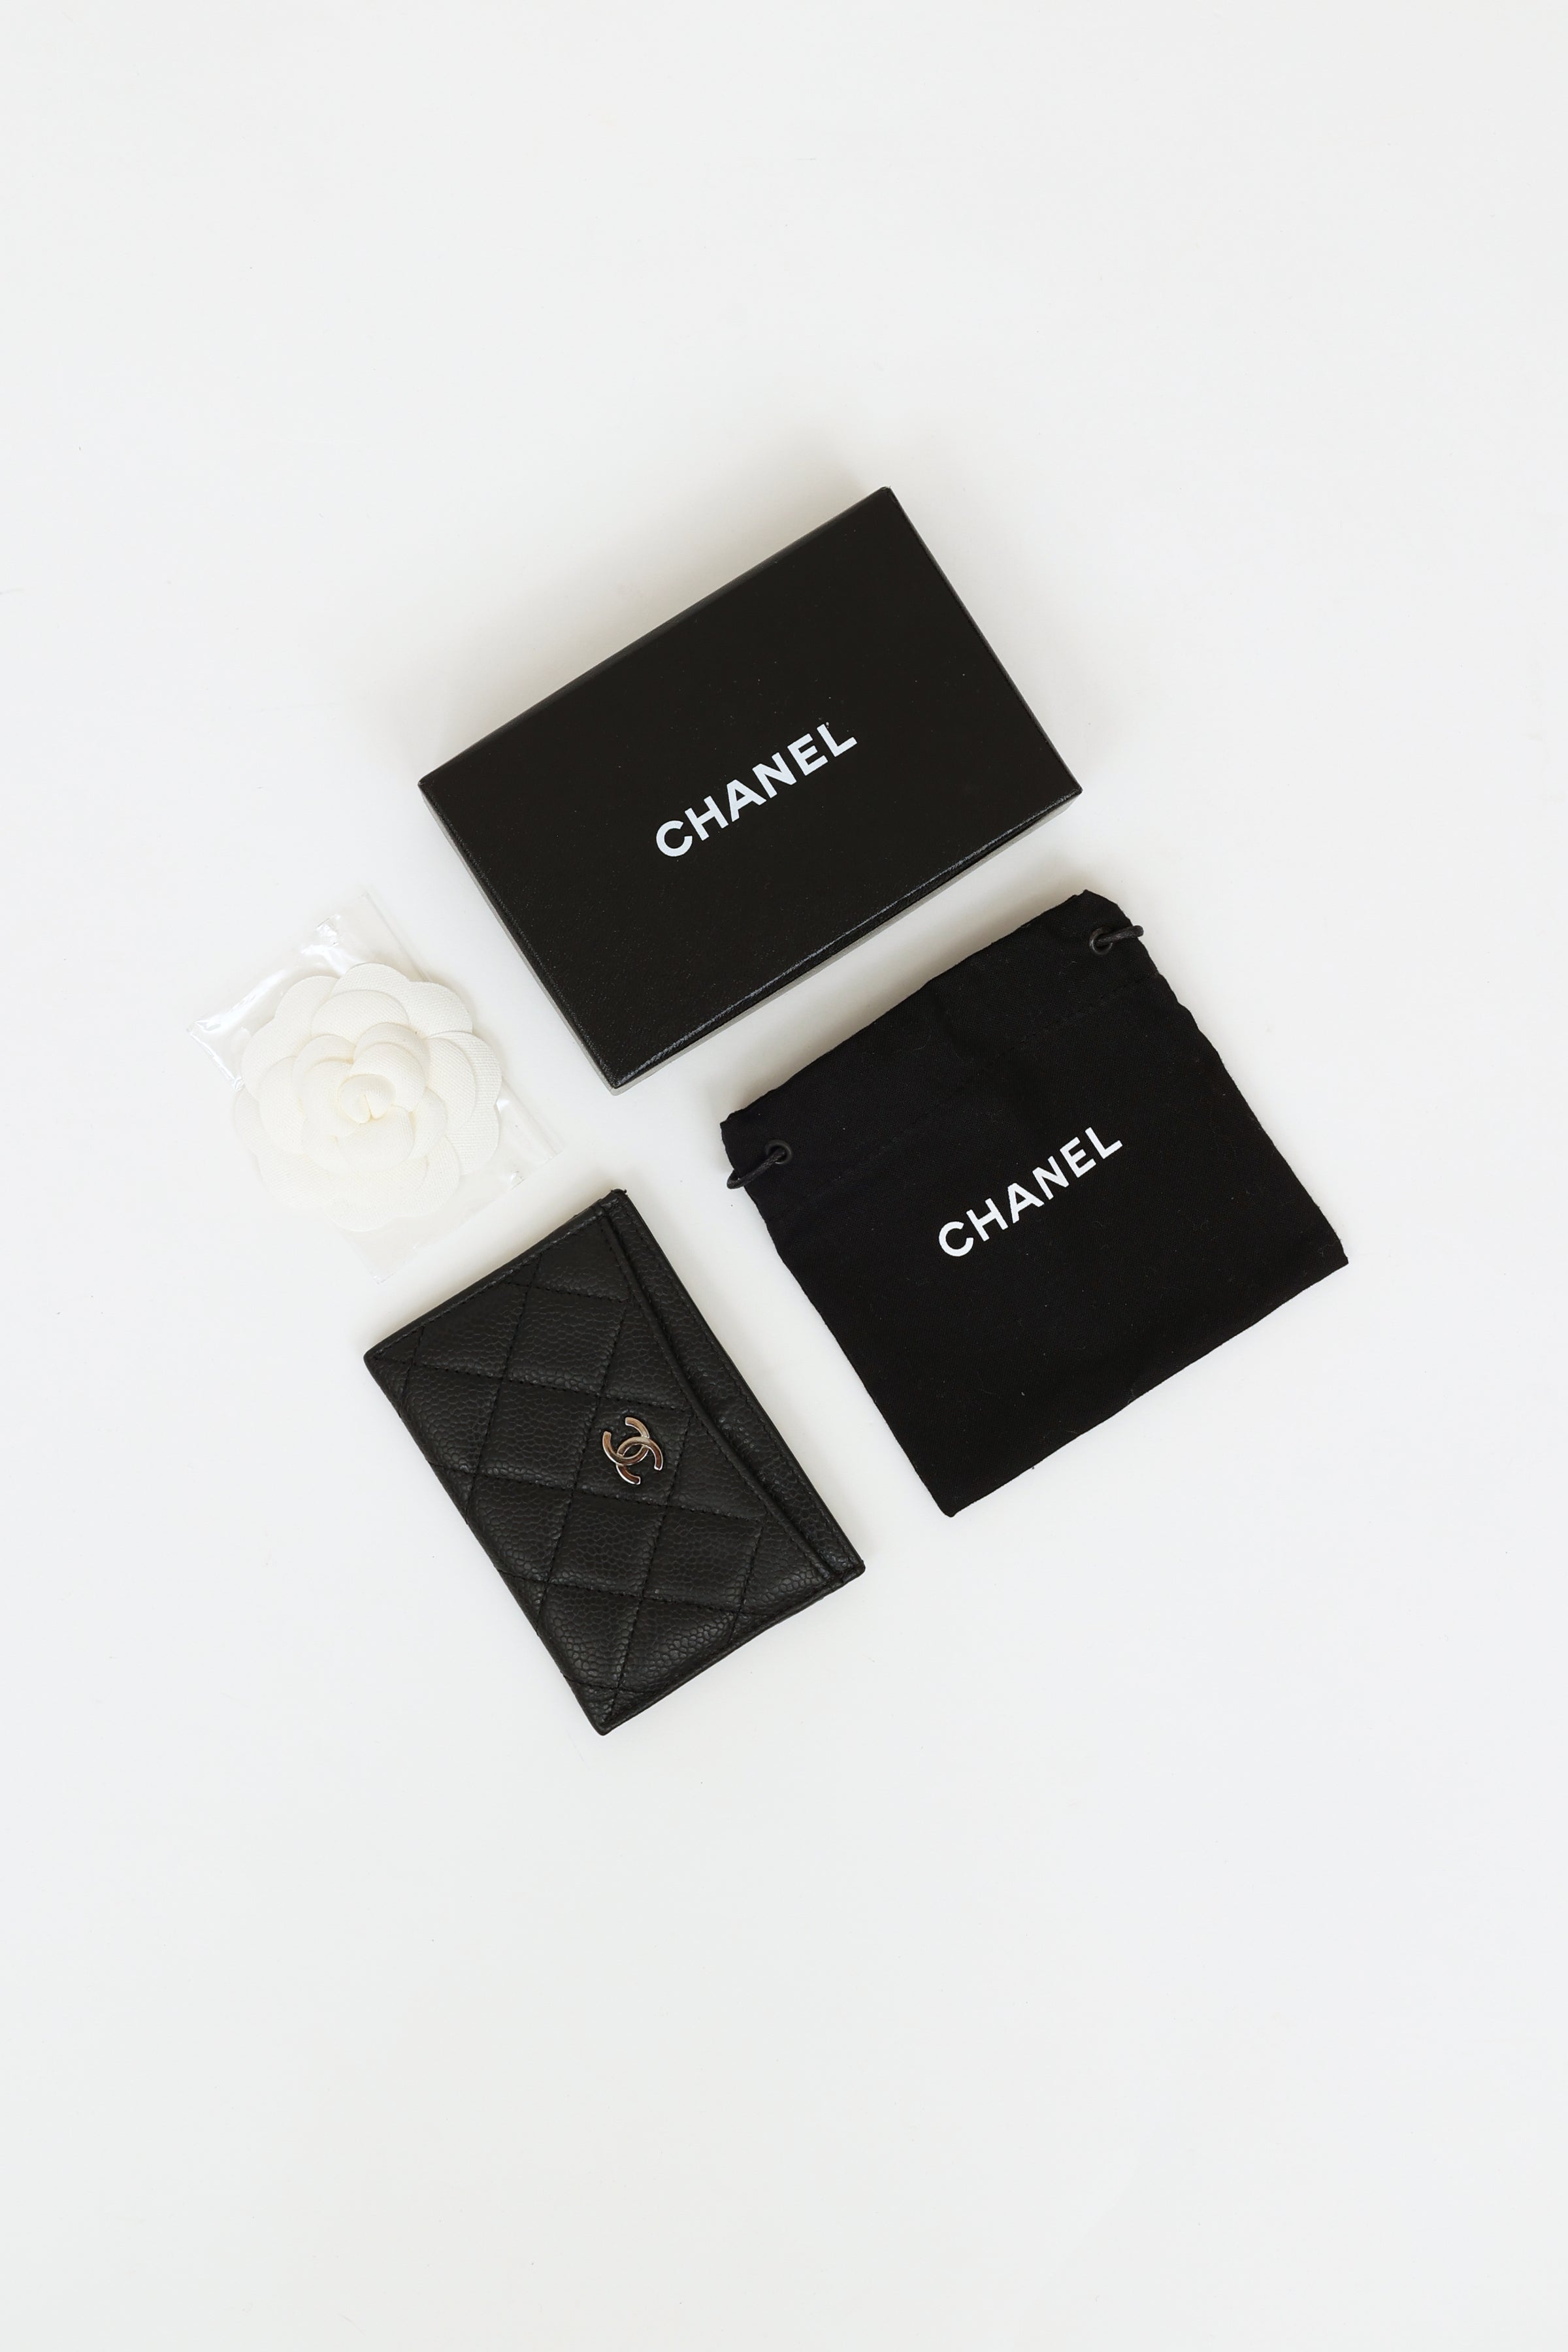 Chanel Black Quilted Caviar CC Card Holder Strass And Silver Hardware, 2022  Available For Immediate Sale At Sotheby's